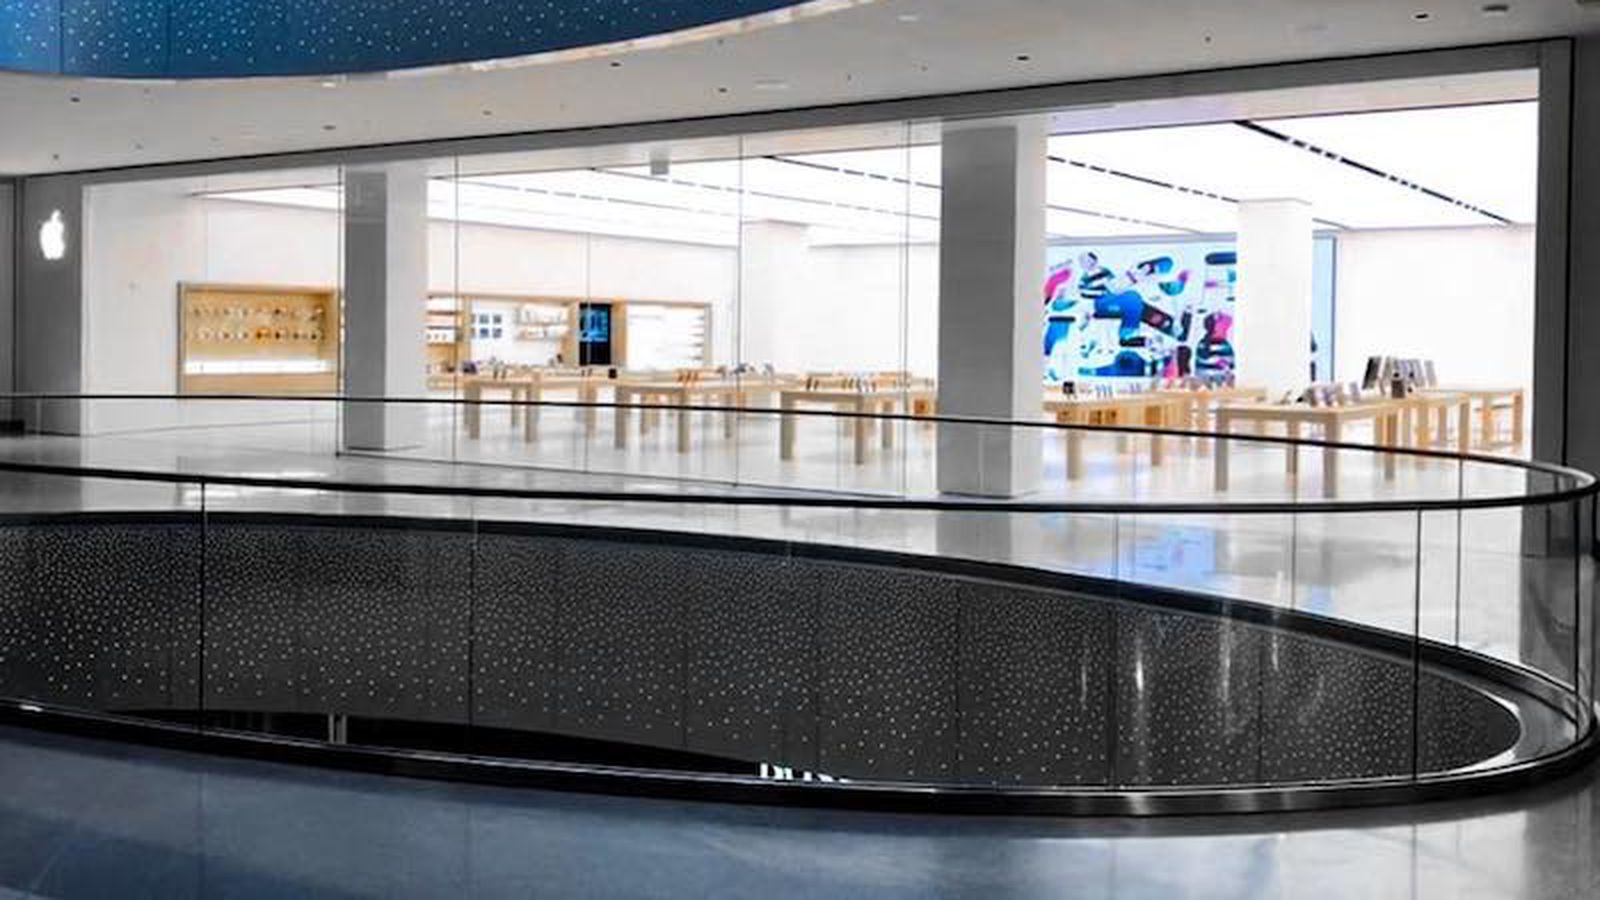 Apple store in LA's Beverly Center relocating to larger space on